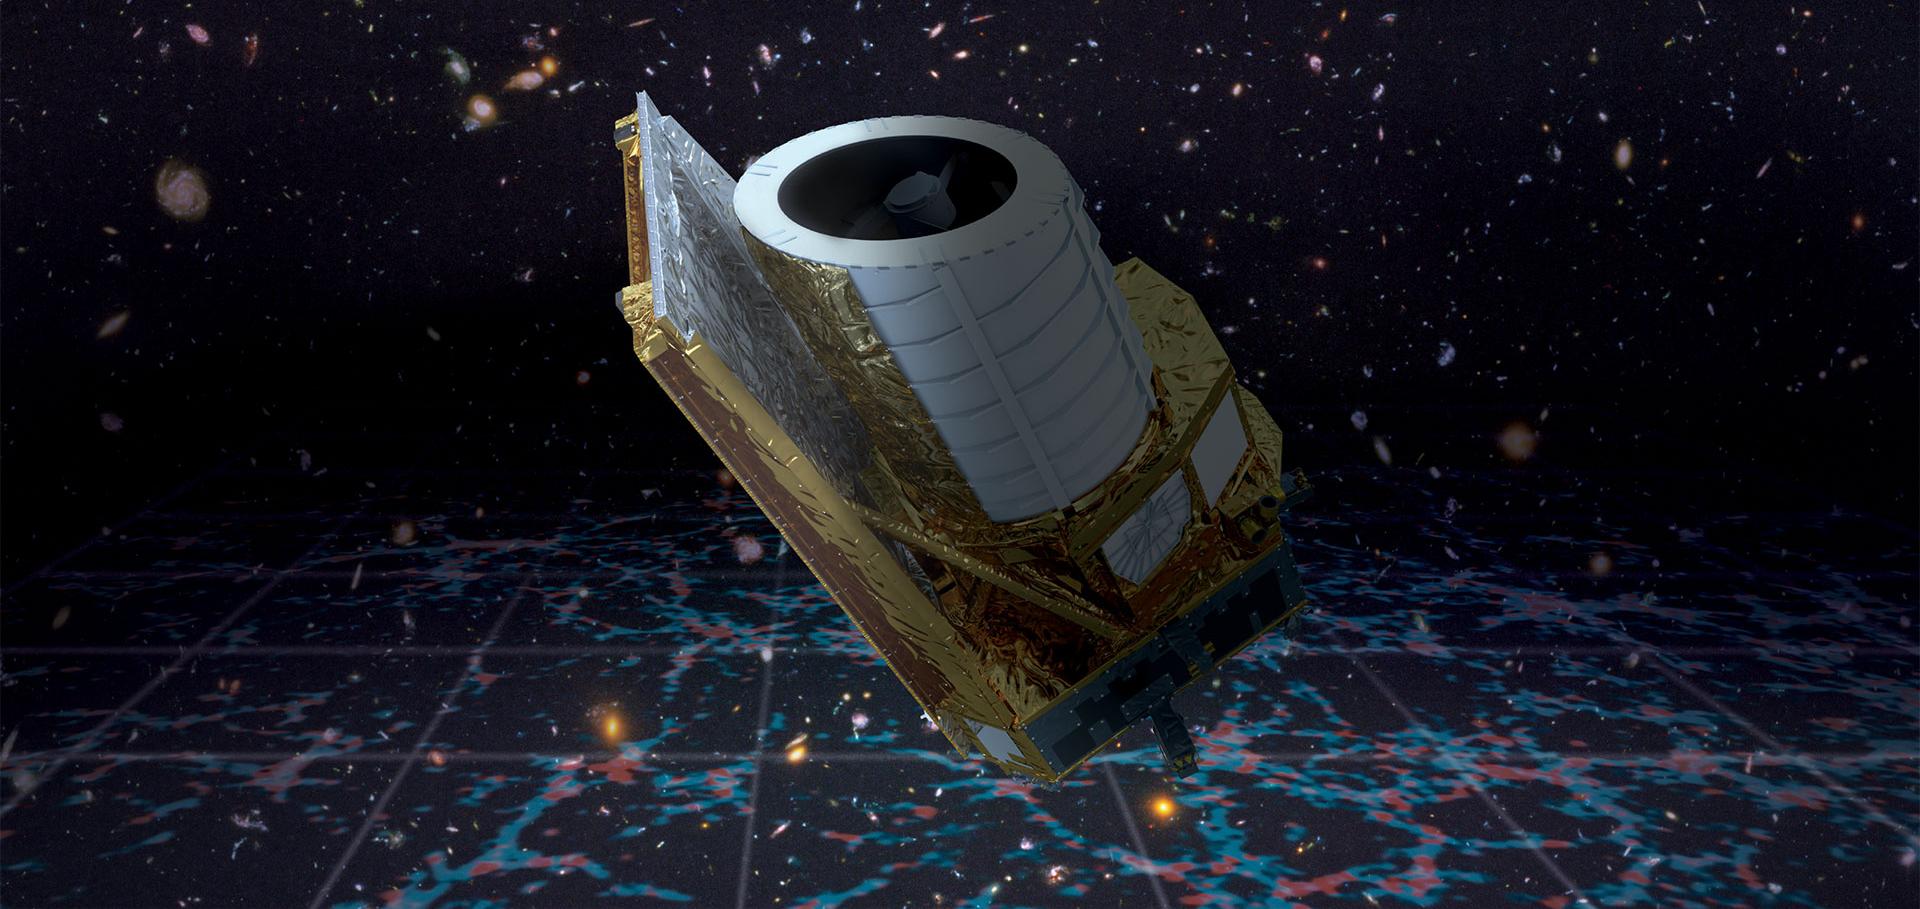 Artist impression of the Euclid mission in space. The spacecraft is white and gold and consists of three main elements: a flat sunshield, a large cylinder where the light from space will enter, and a 'boxy' bottom containing the instruments. 